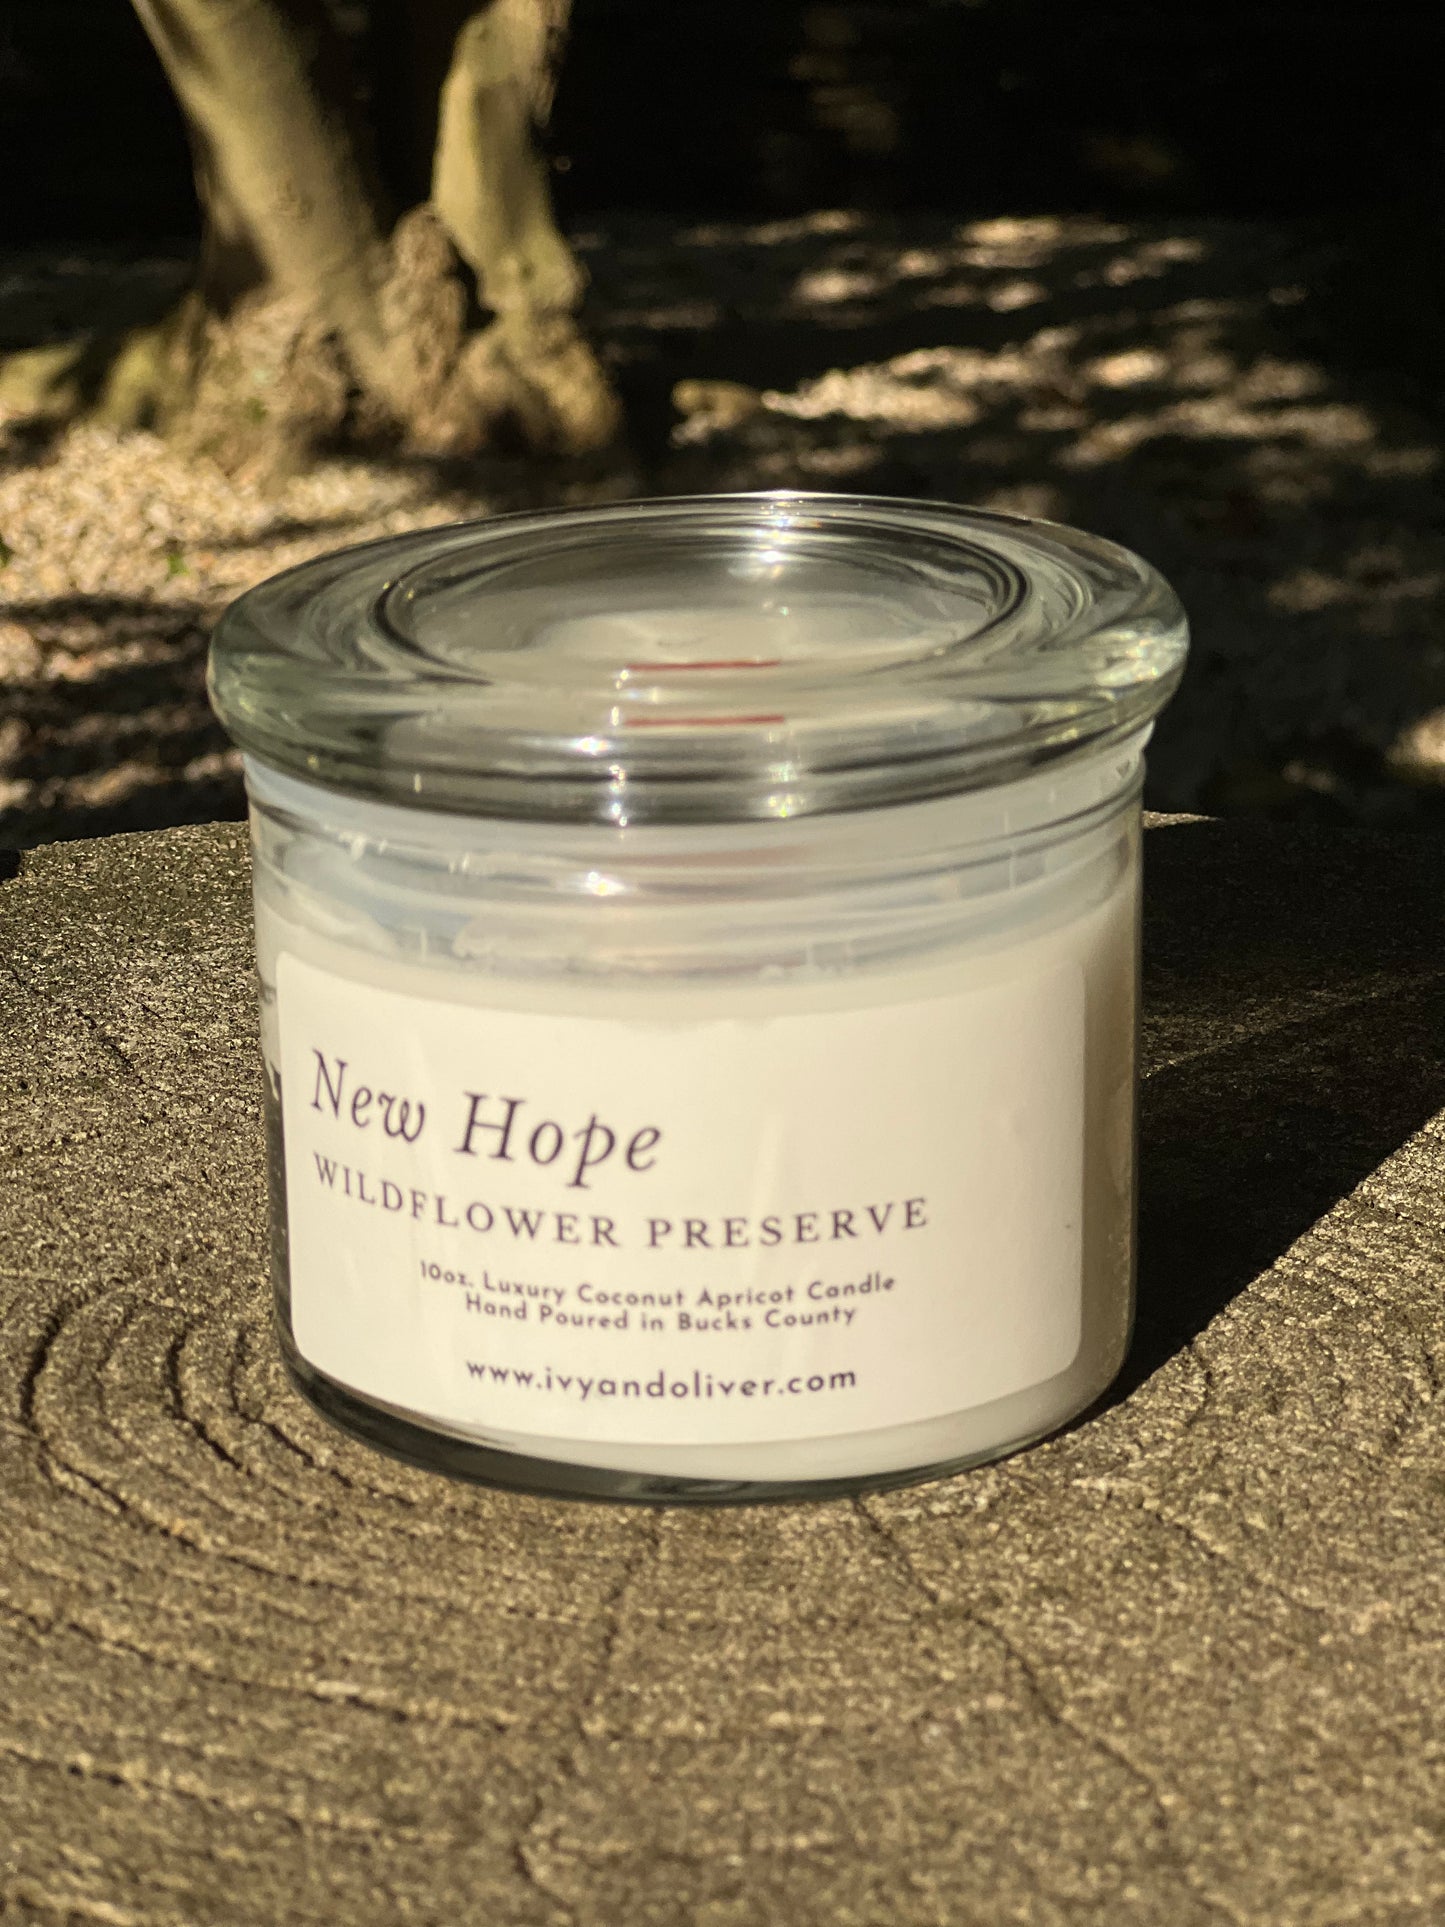 New Hope - Wildflower Preserve - Wooden Wick Candle